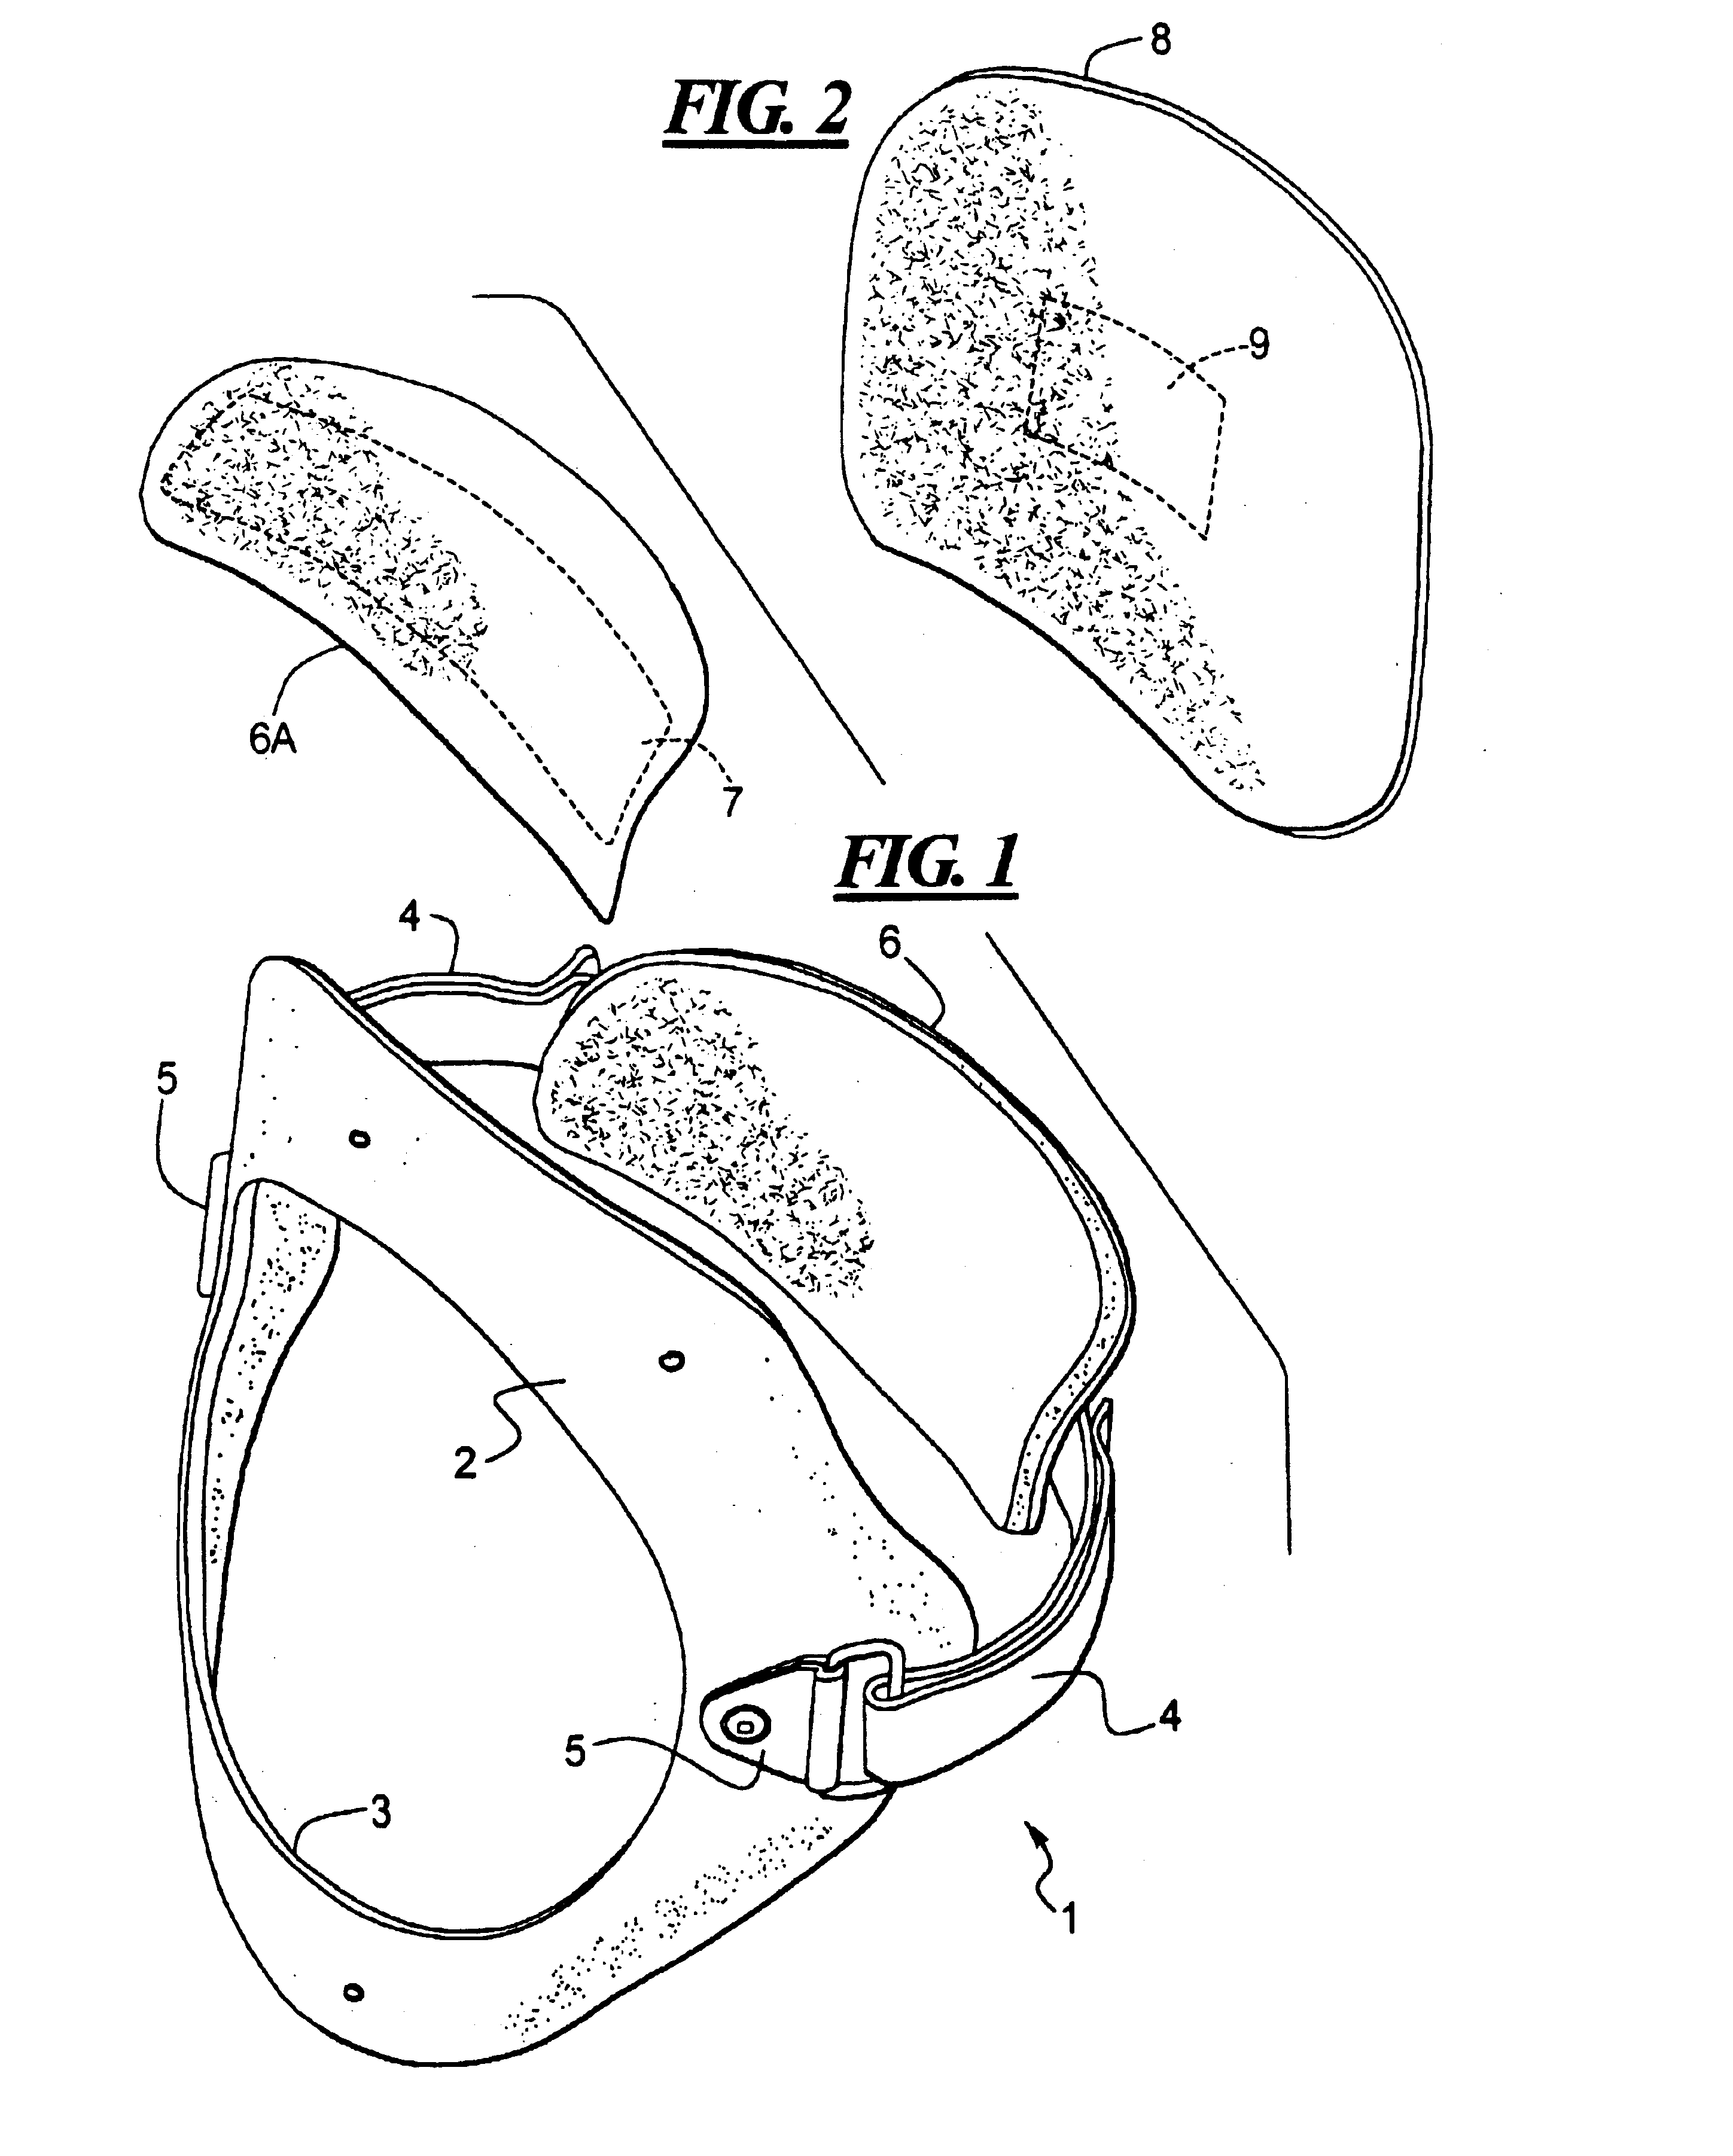 Method for lordosis adjustment for treating discomfort in, or originating in, the cervical spine region